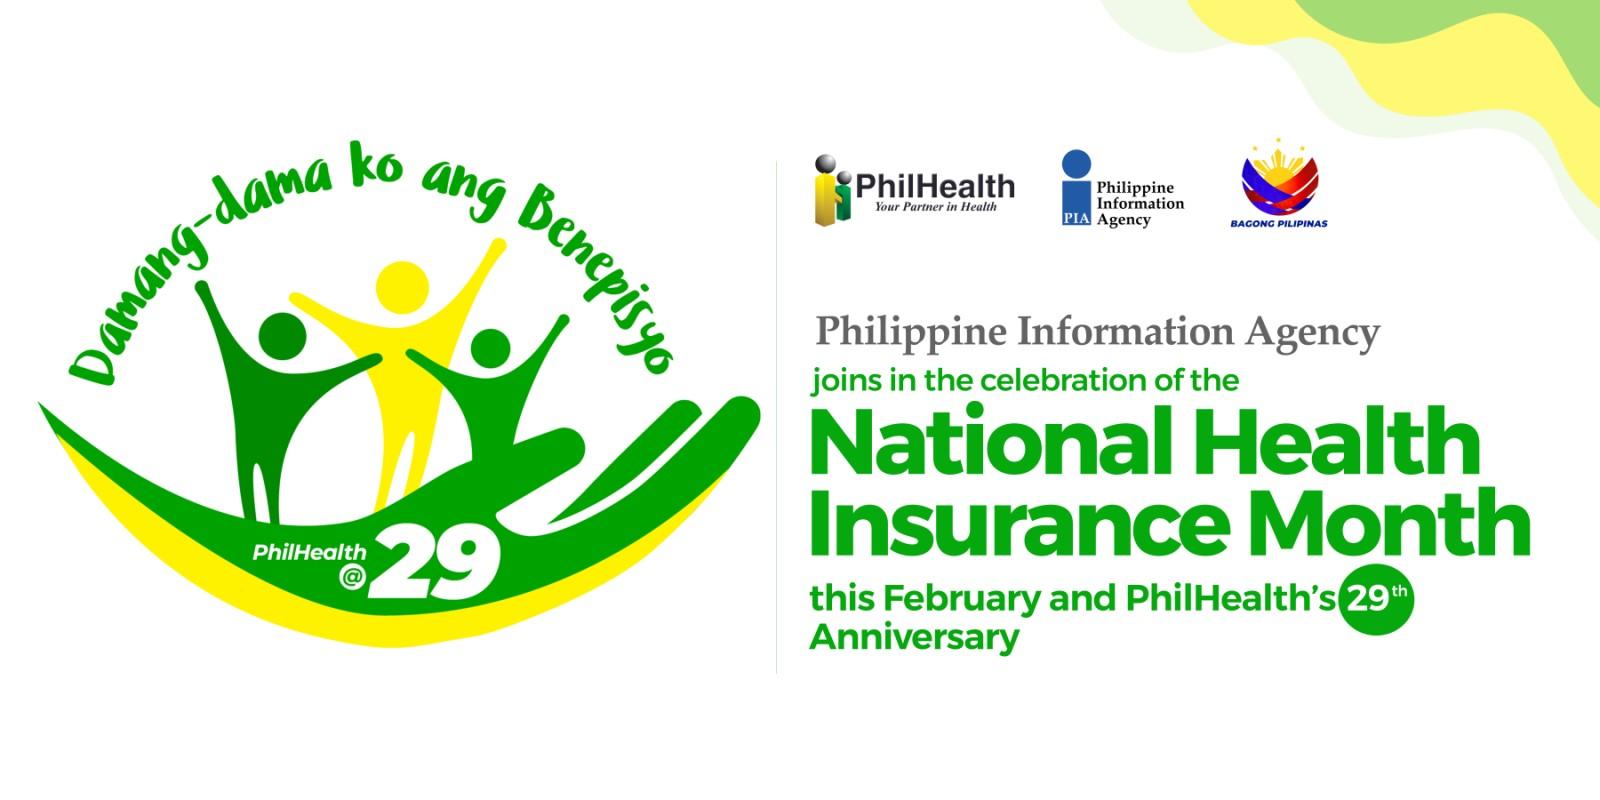 Philippine Information Agency joins the celebration of National Health Insurance Month